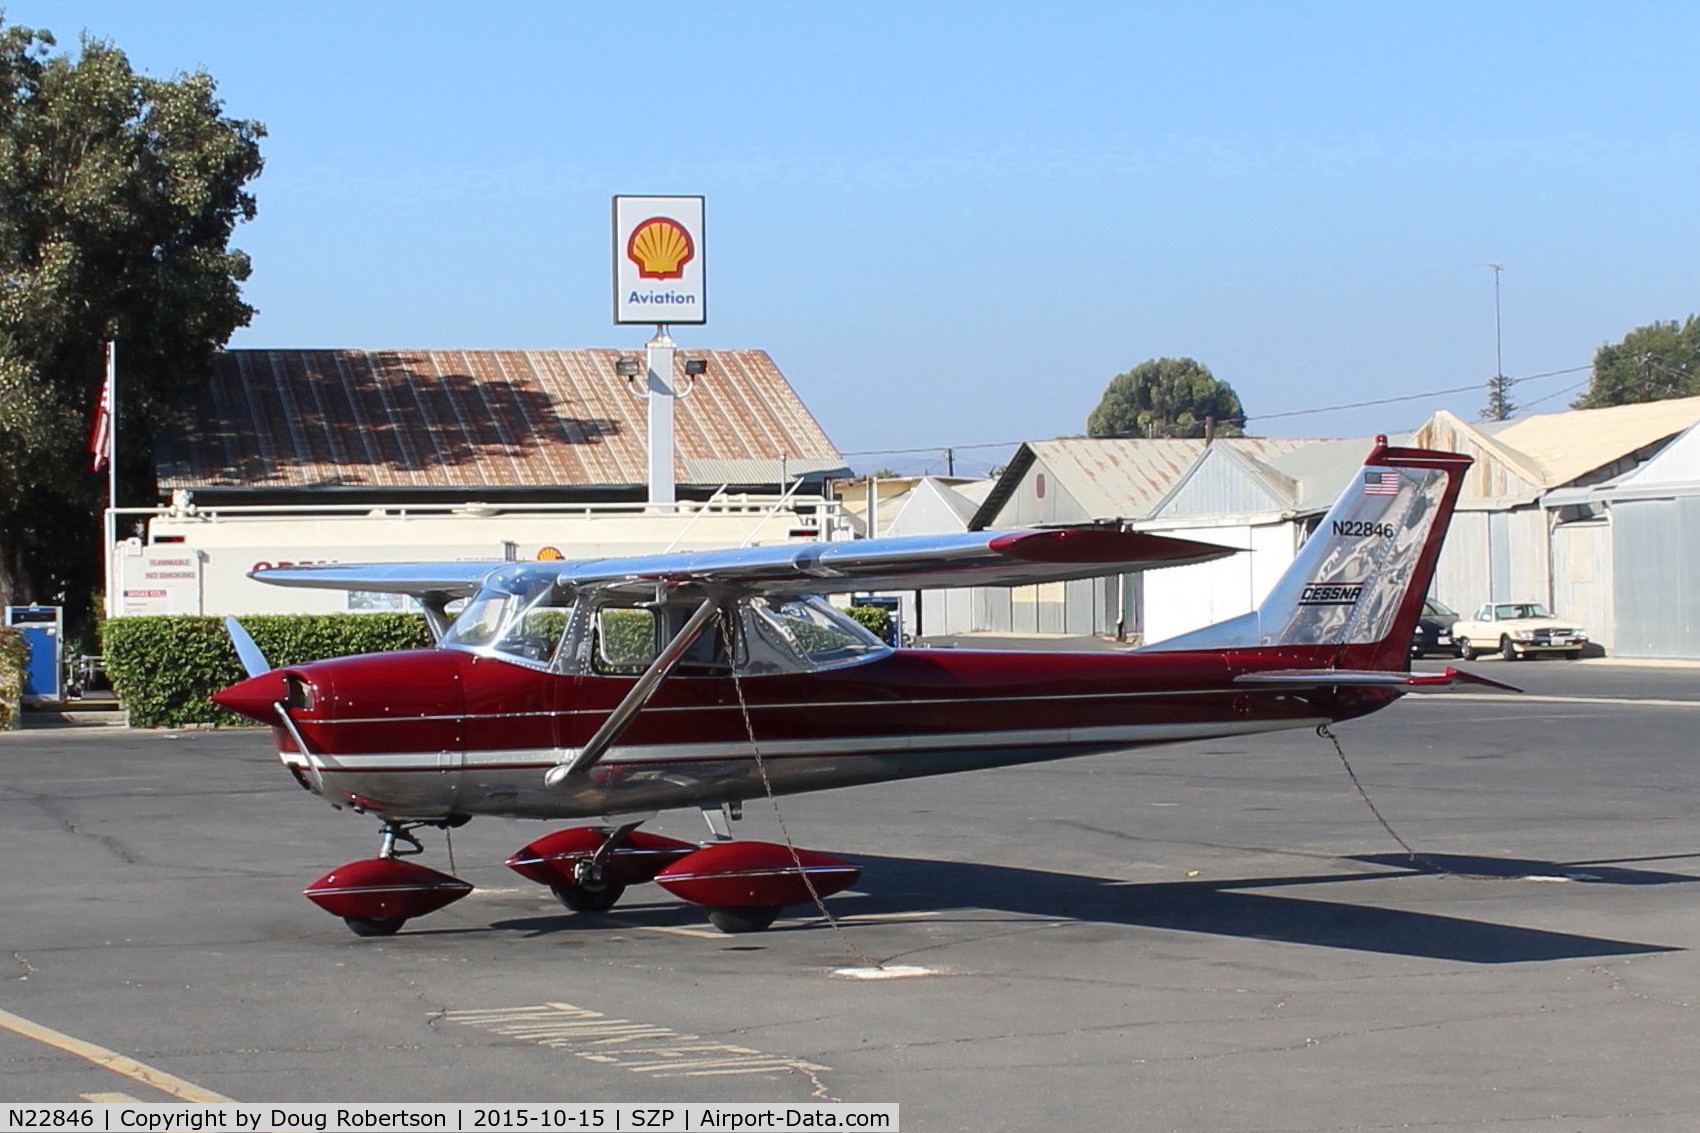 N22846, 1968 Cessna 150H C/N 15068559, 1968 Cessna 150H, Continental O-200 100 Hp, spectacular bare metal polish and refinish! A standout beauty! Continental O-200 100 Hp, on Transient Ramp